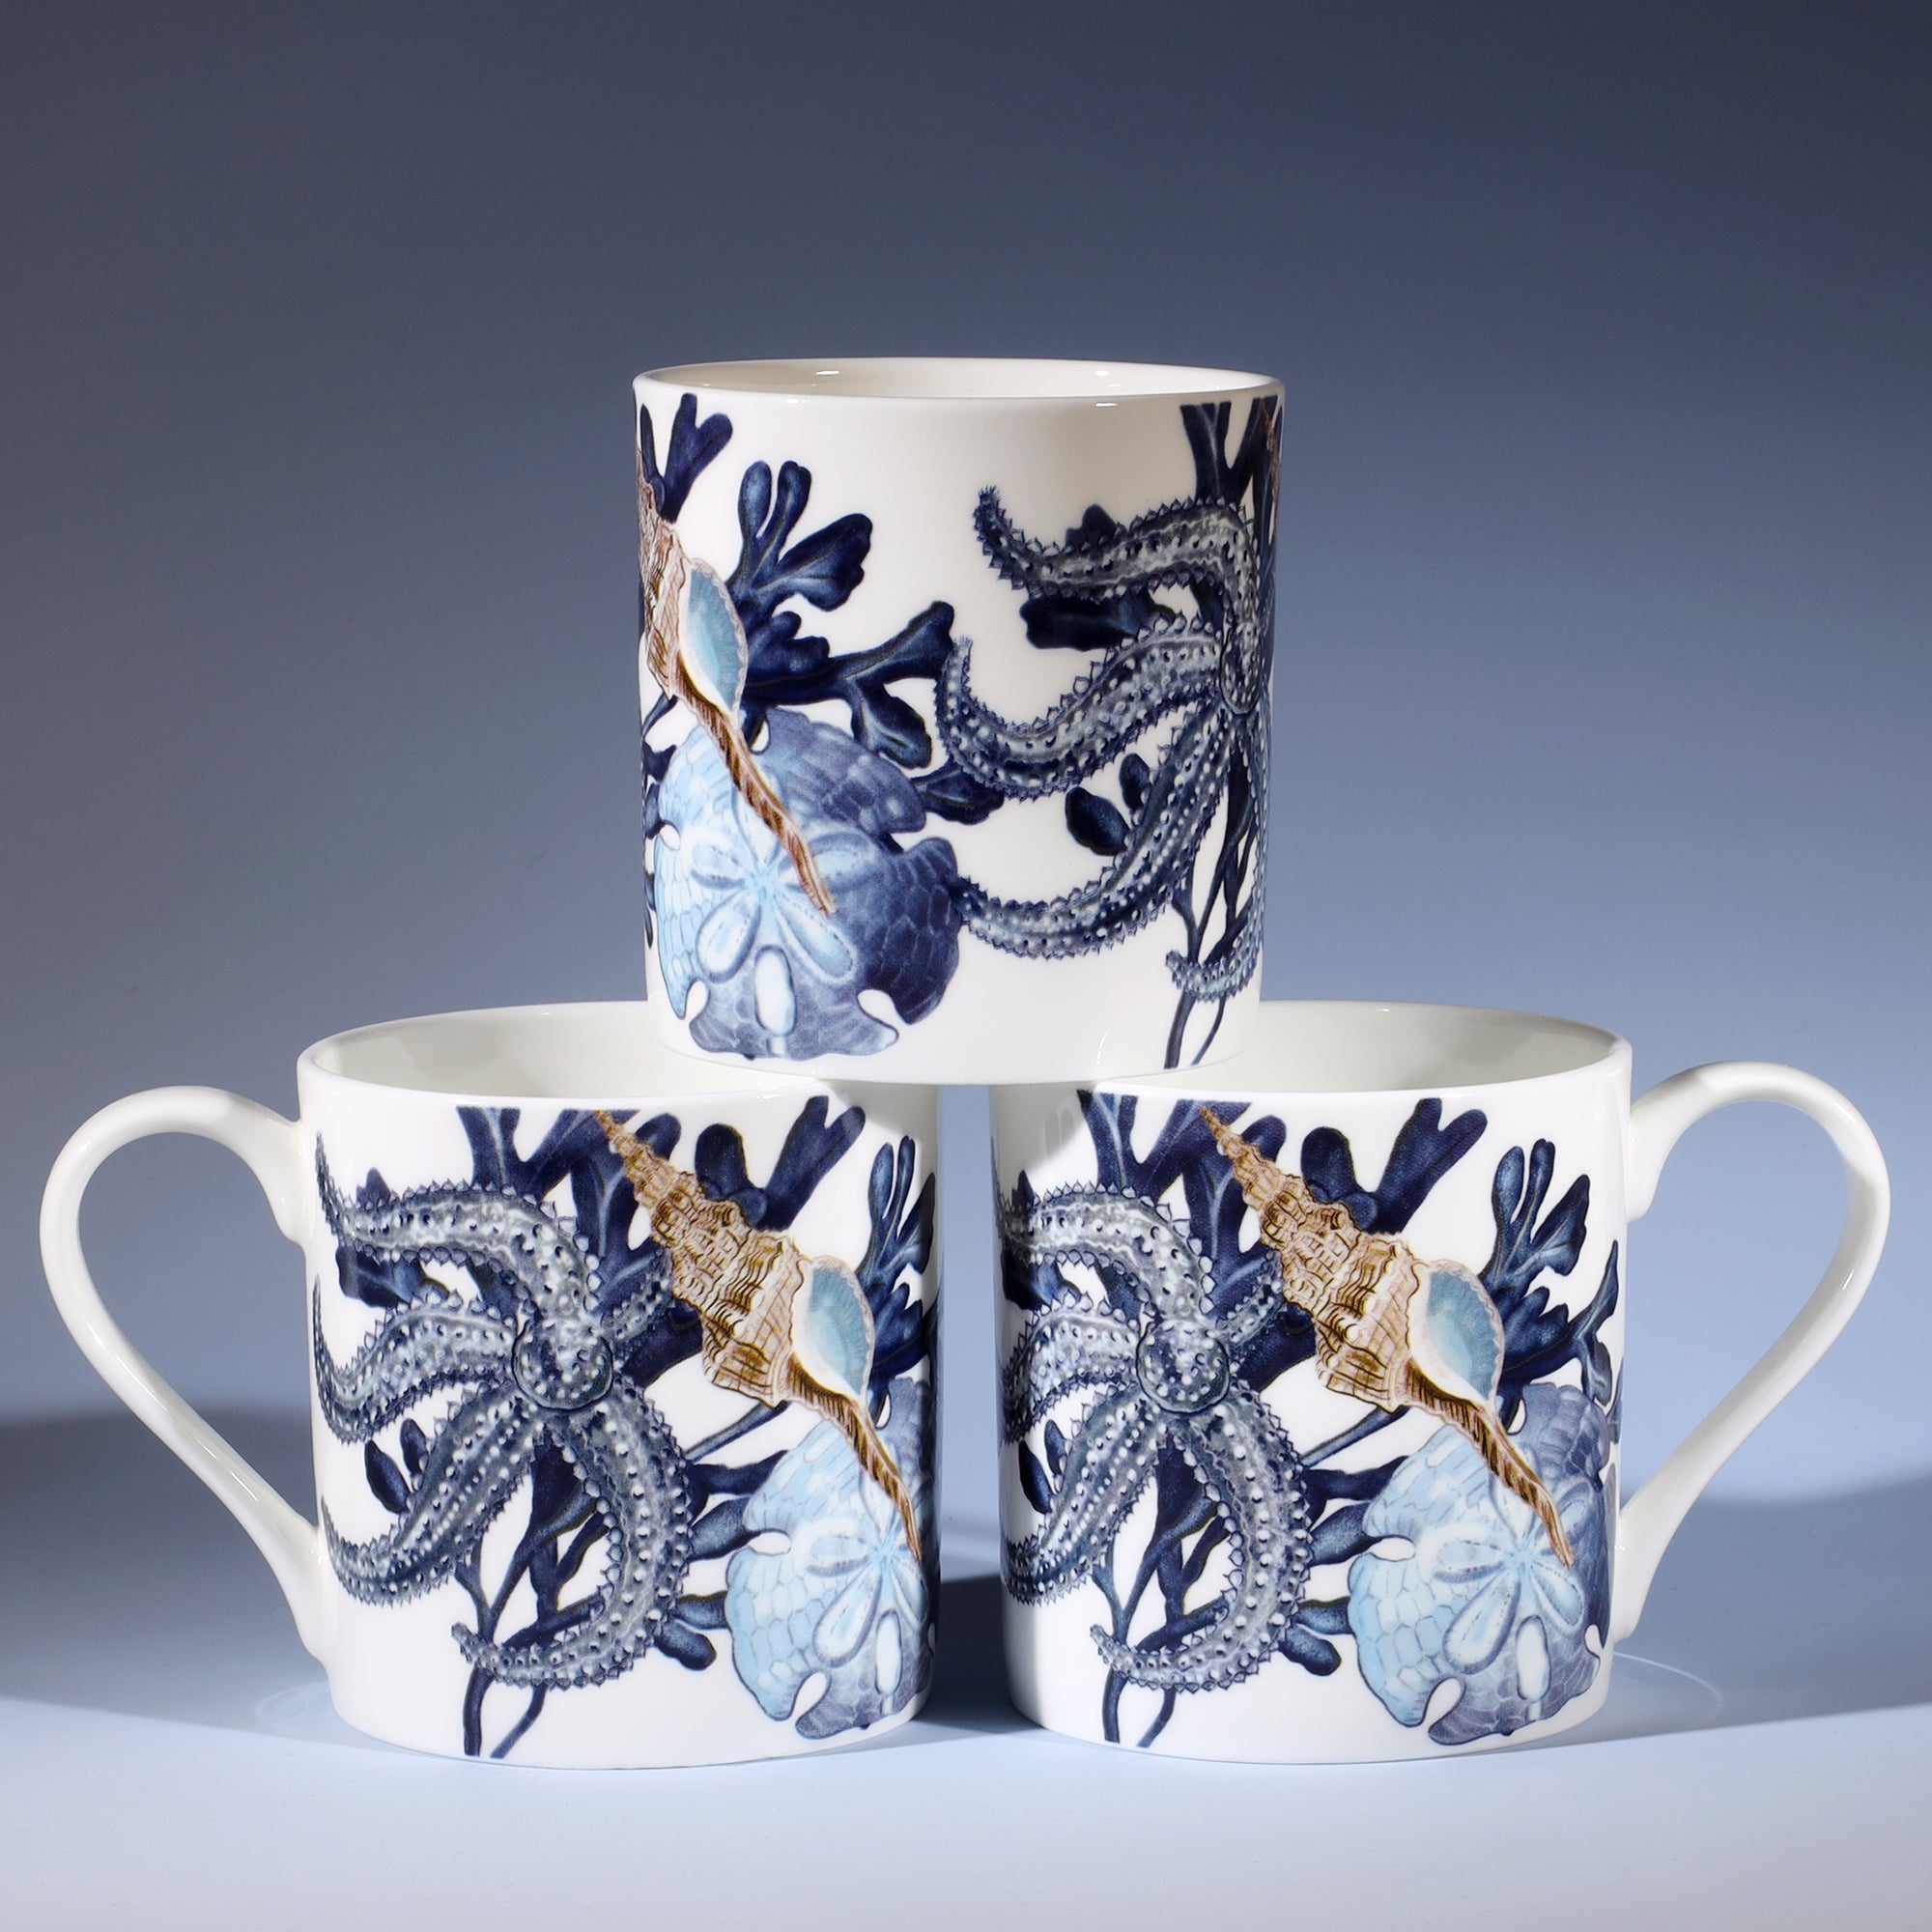 The picture shows three Beachcomber mugs with starfish, seaweed and shells design with their handles pointing towards the outside. The third mug sits on top of both of them, in the middle.